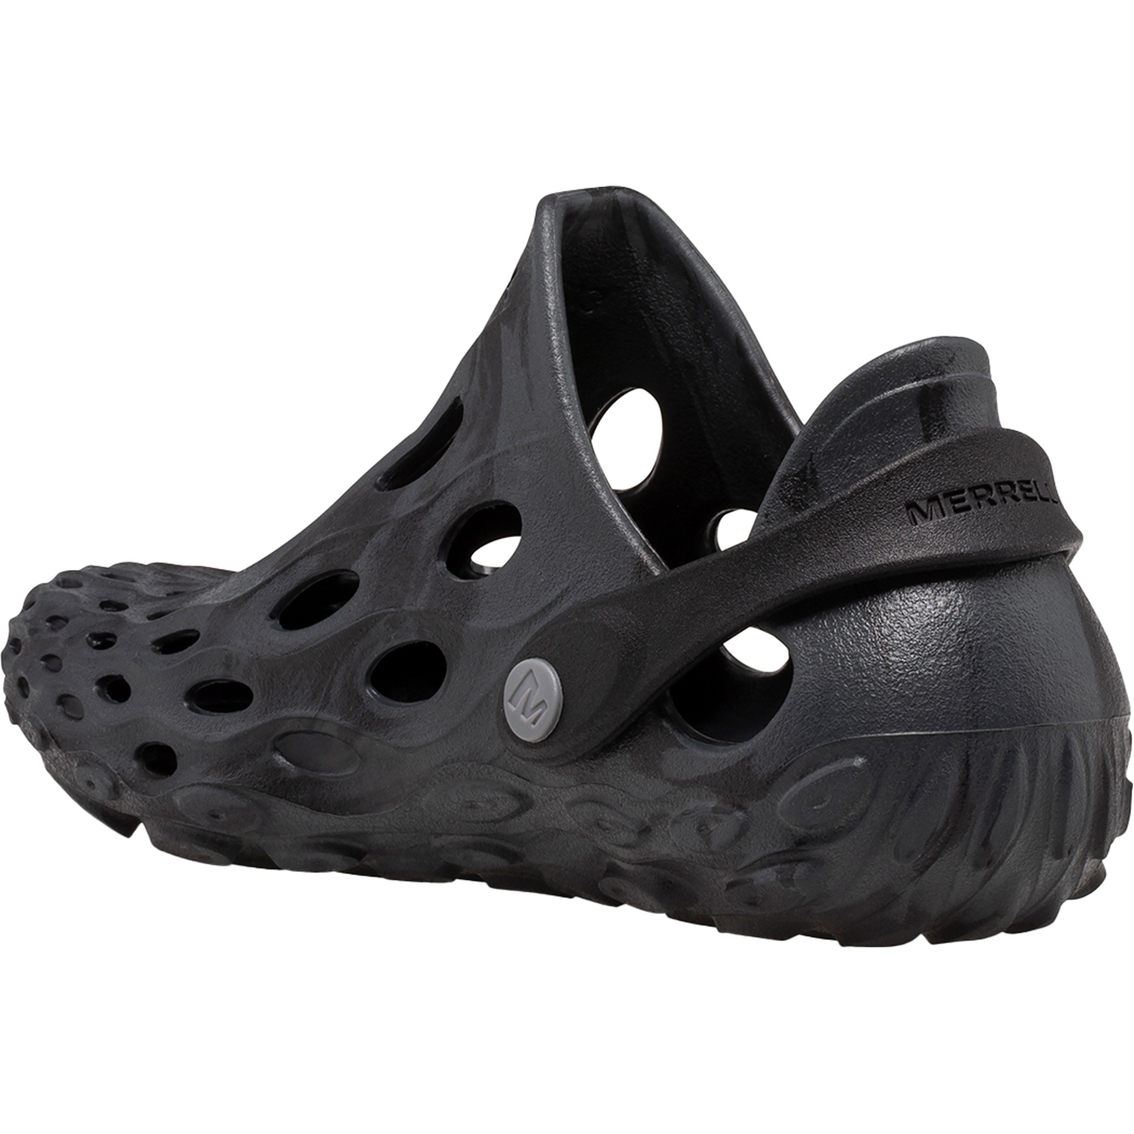 Merrell Boys Hydro Moc Water Shoes - Image 2 of 4